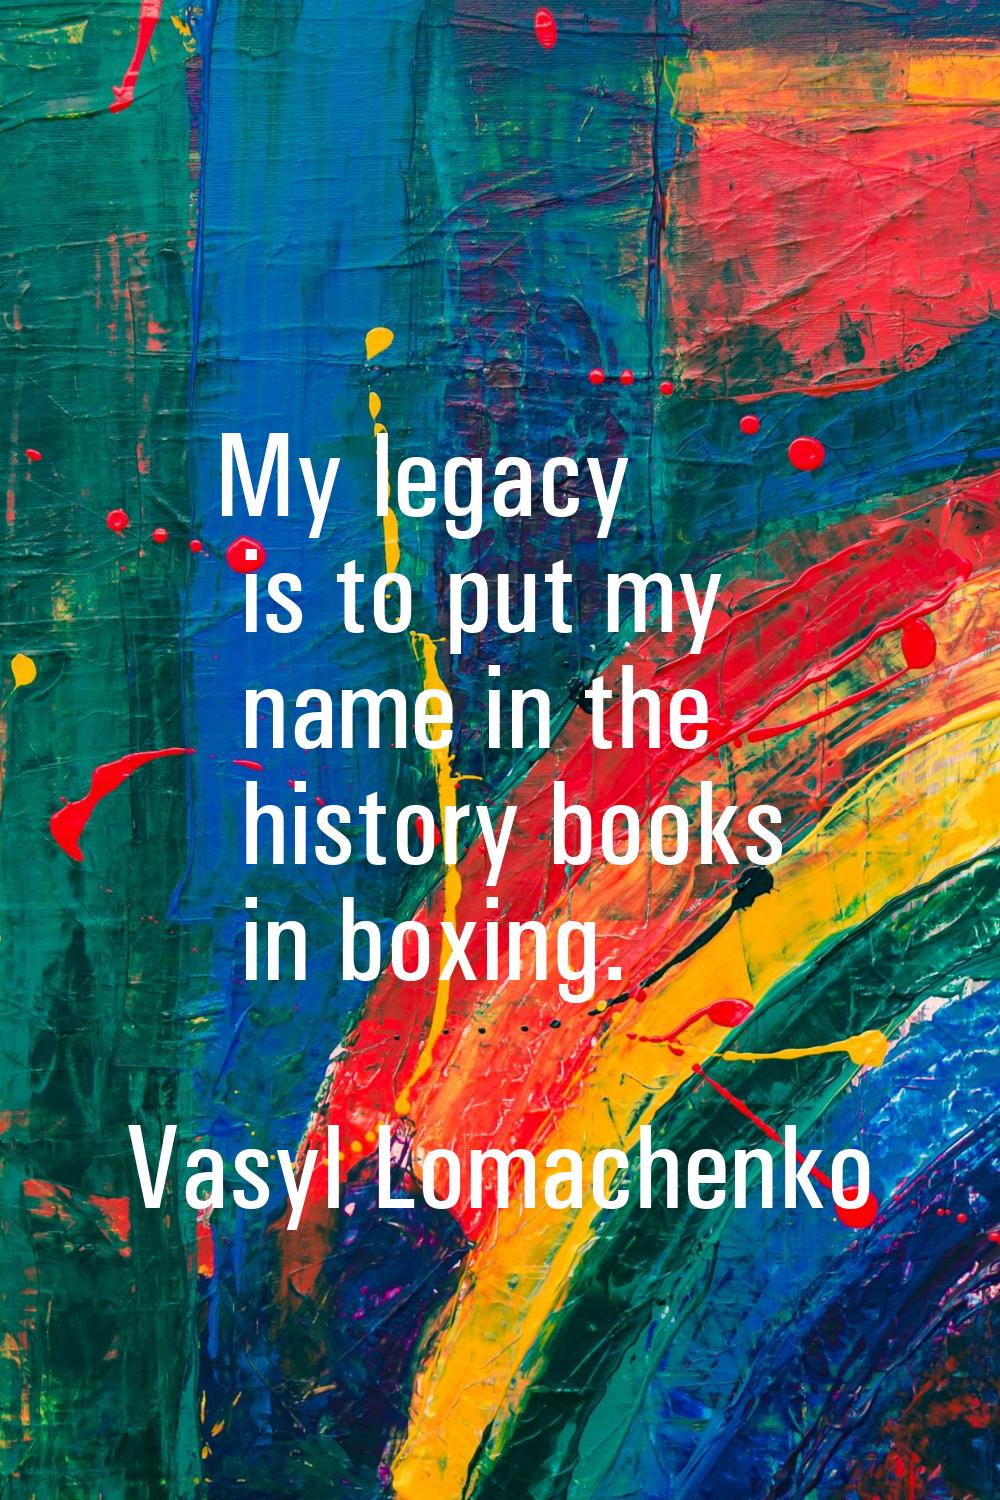 My legacy is to put my name in the history books in boxing.